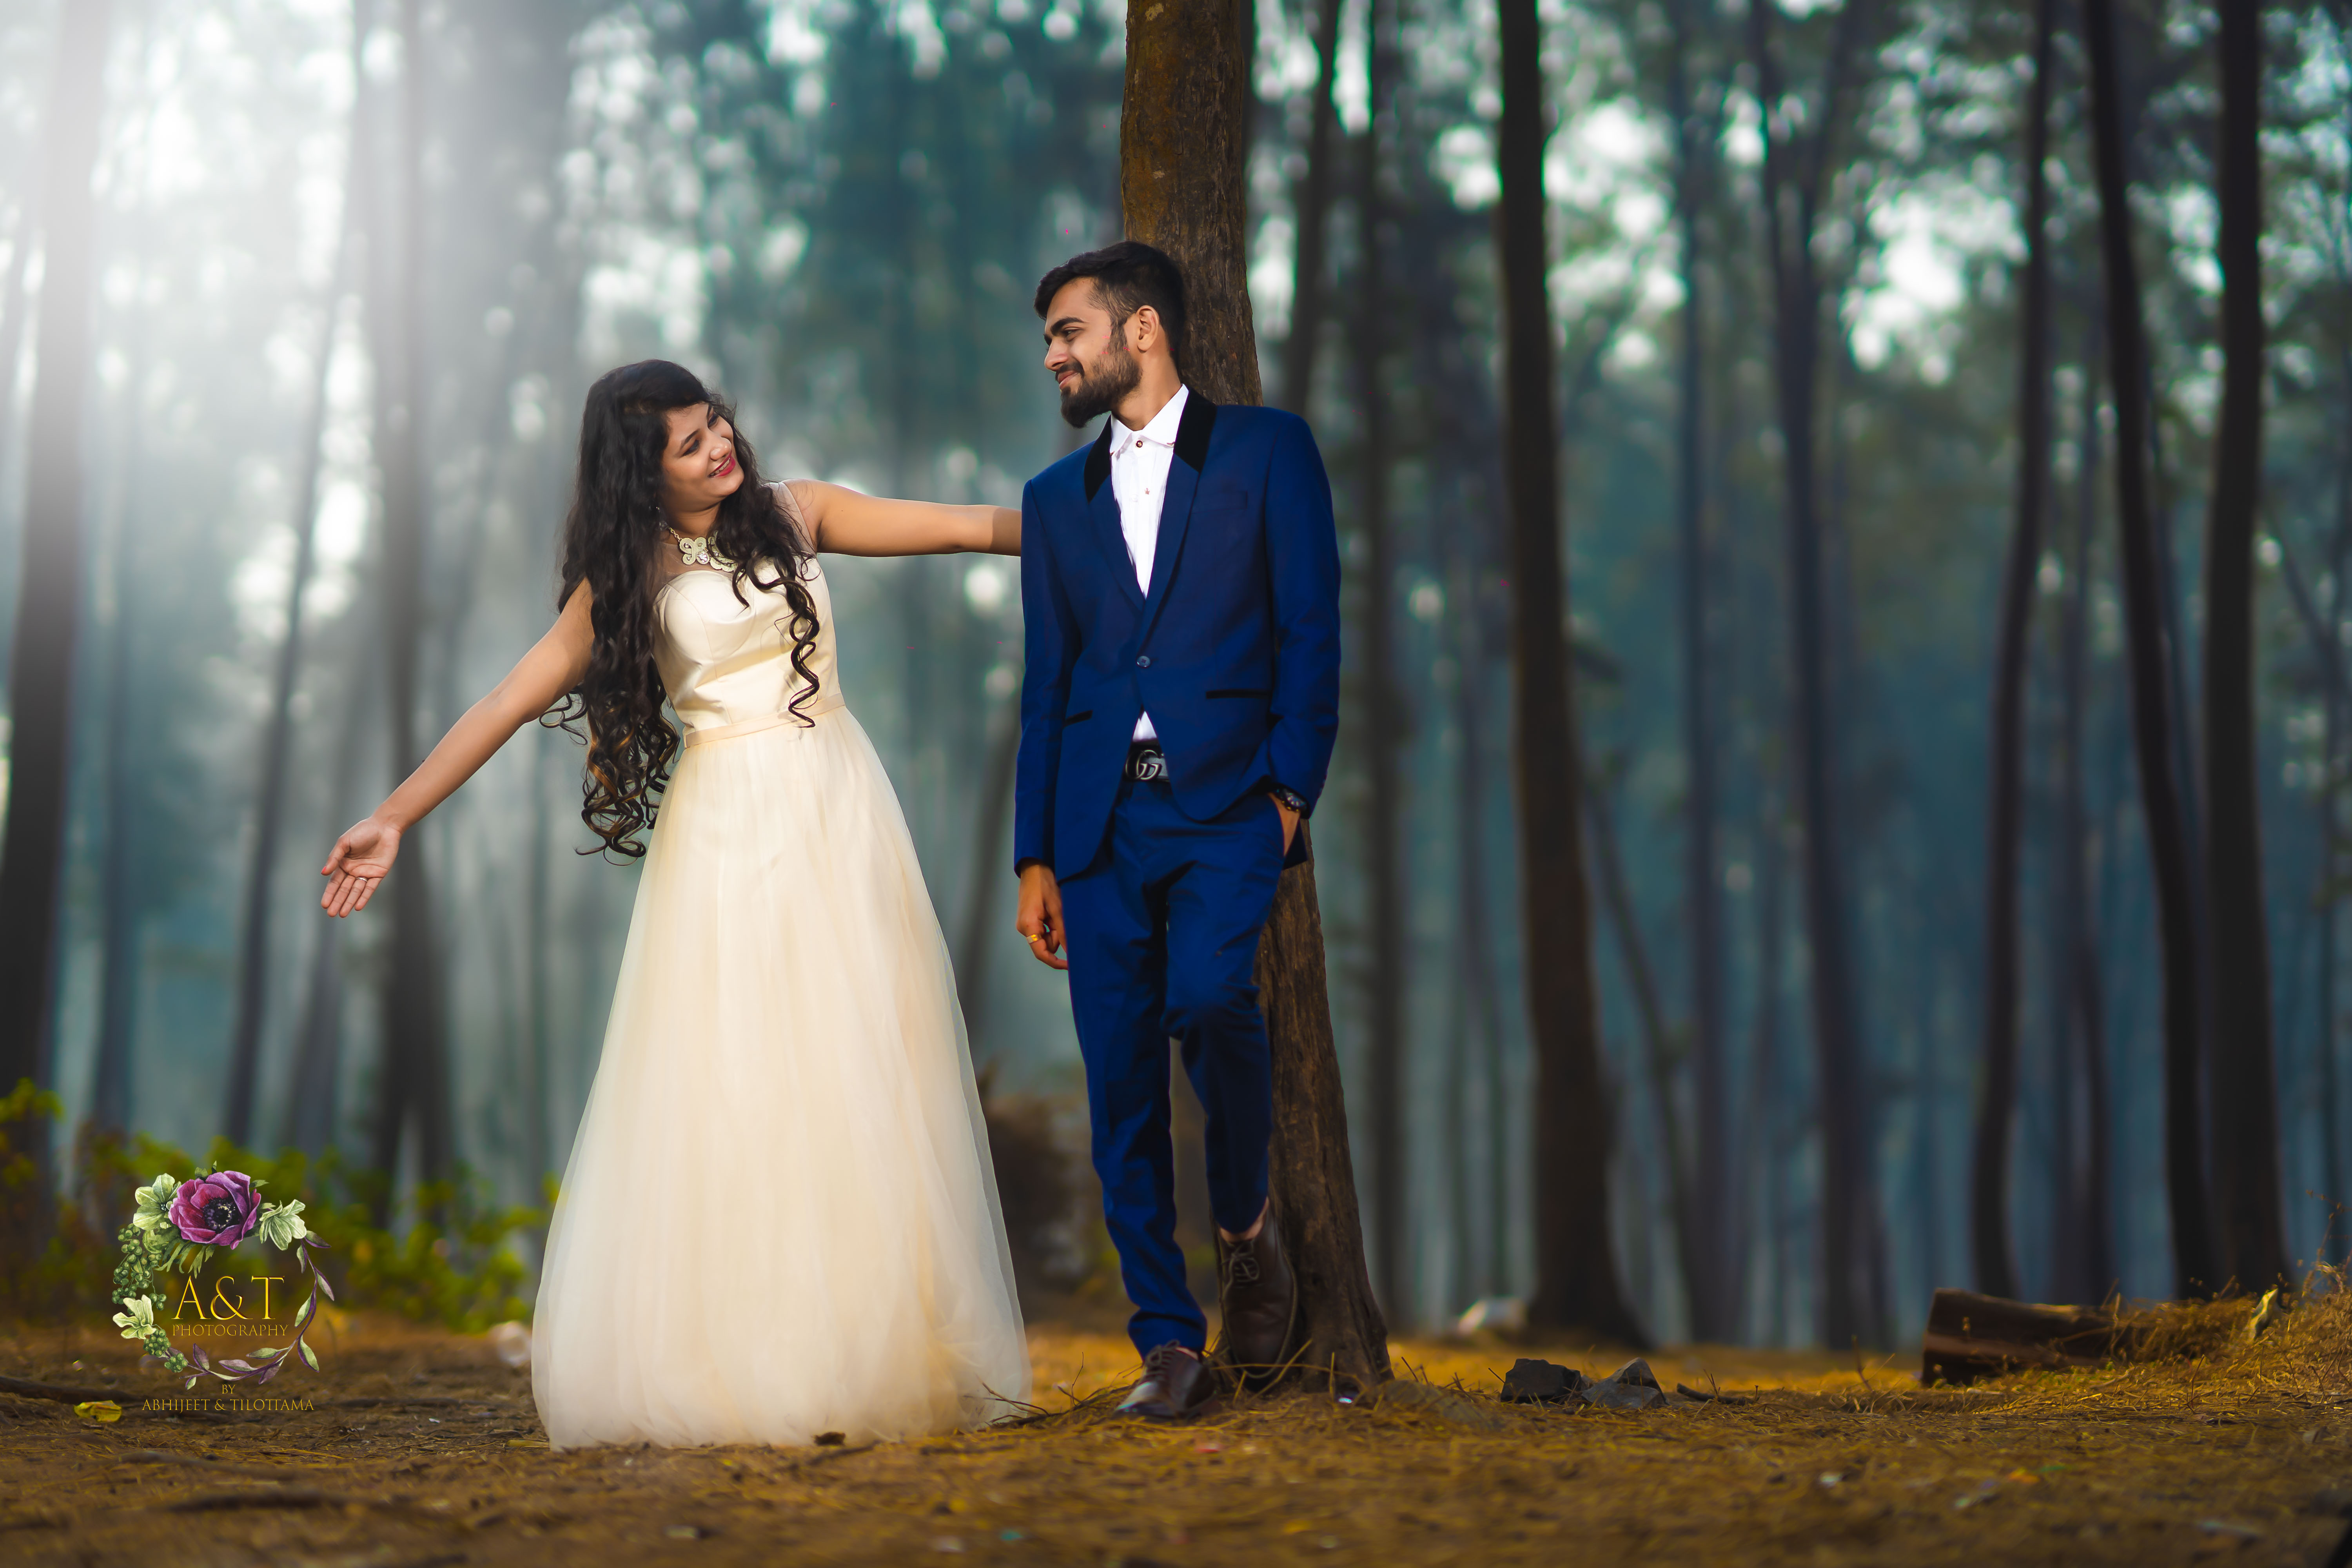 Beautiful and Dreamy Pre-wedding Photoshoot of Dharmik and Jinal at Lush Green Forests of Alibaug